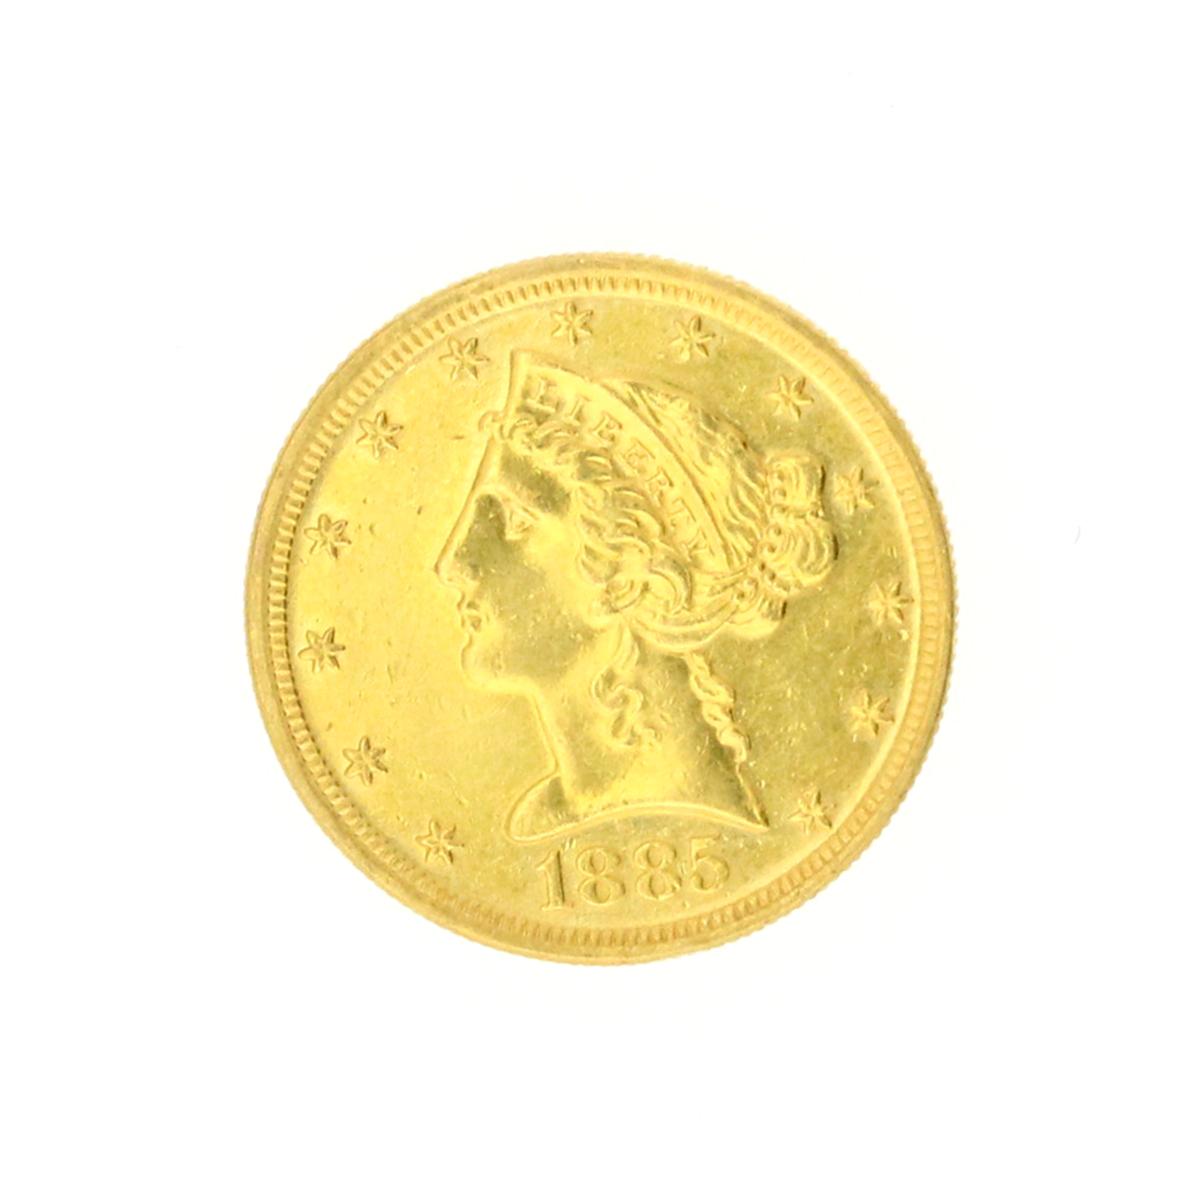 Extremely Rare 1885 $5 U.S. Liberty Head Gold Coin